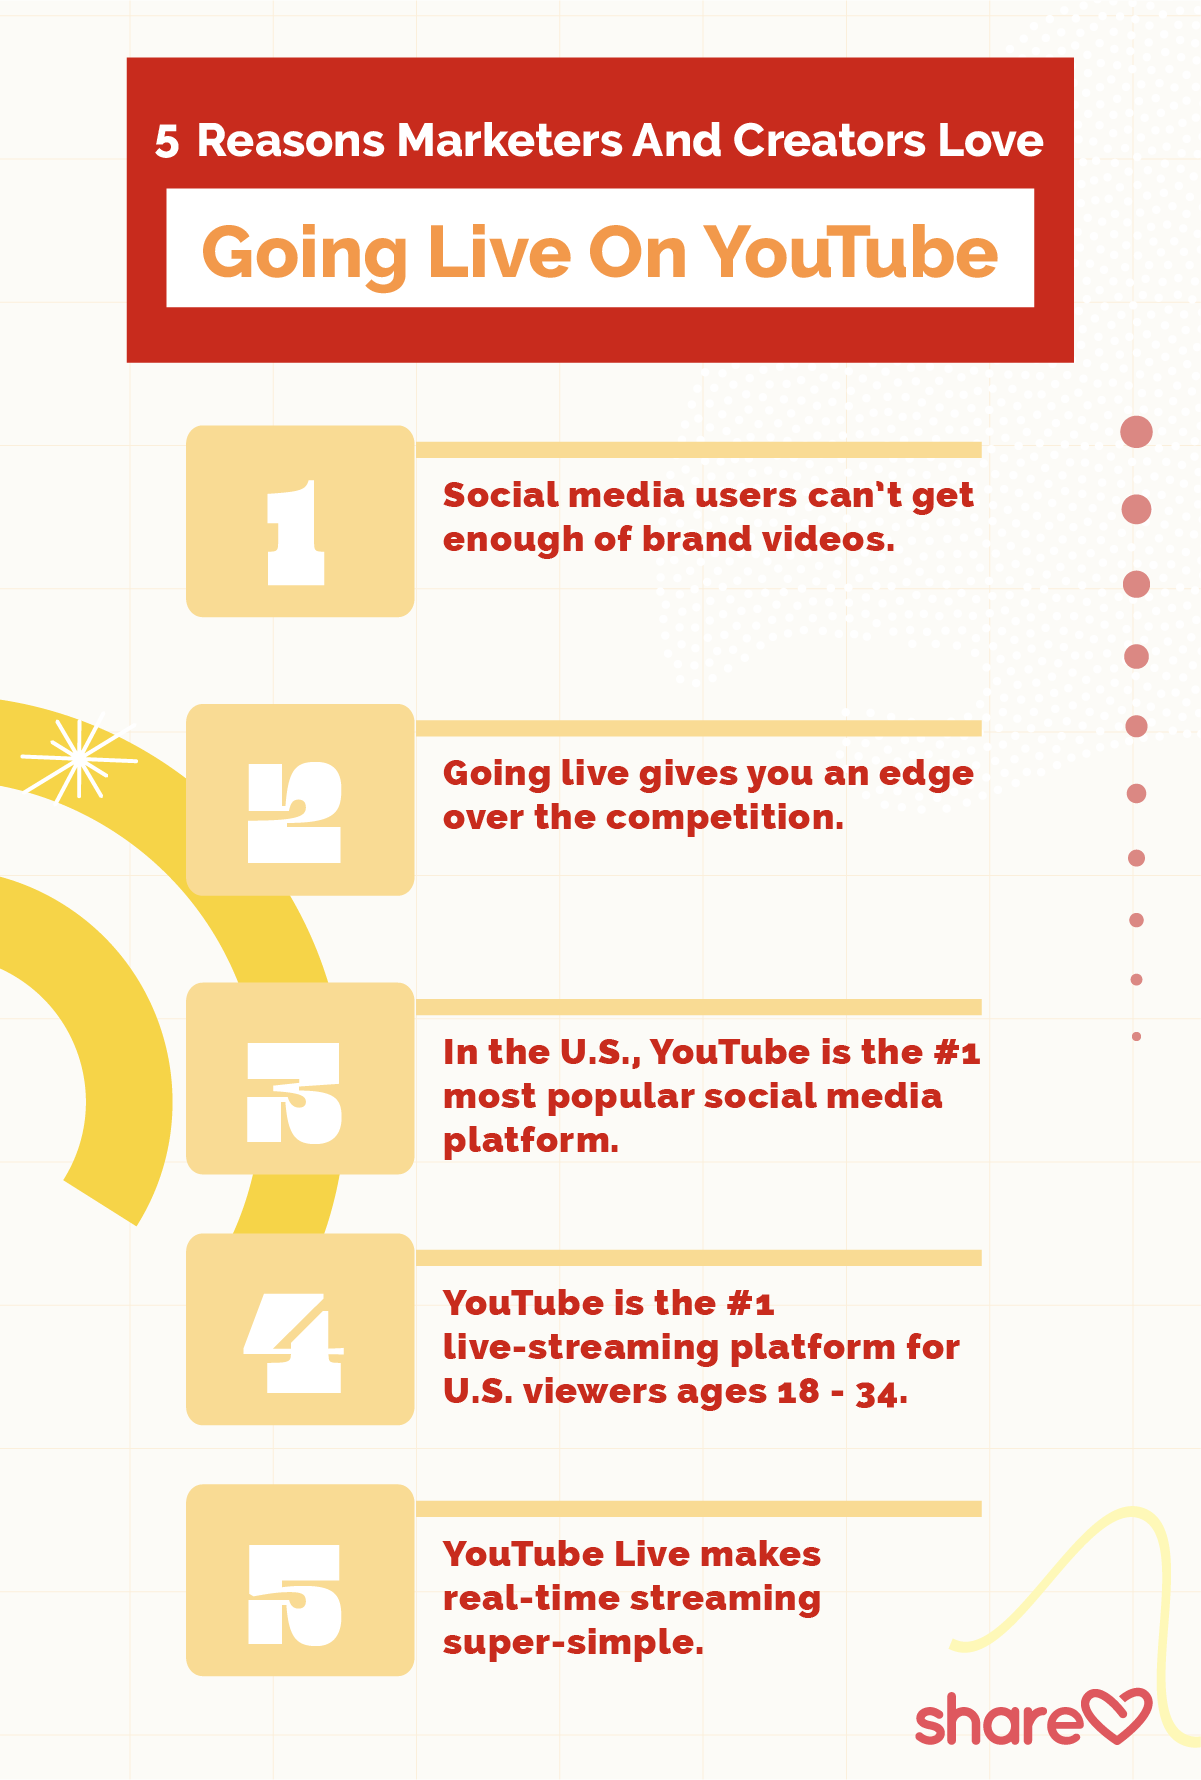 Five Reasons Marketers And Creators Love Going Live On YouTube